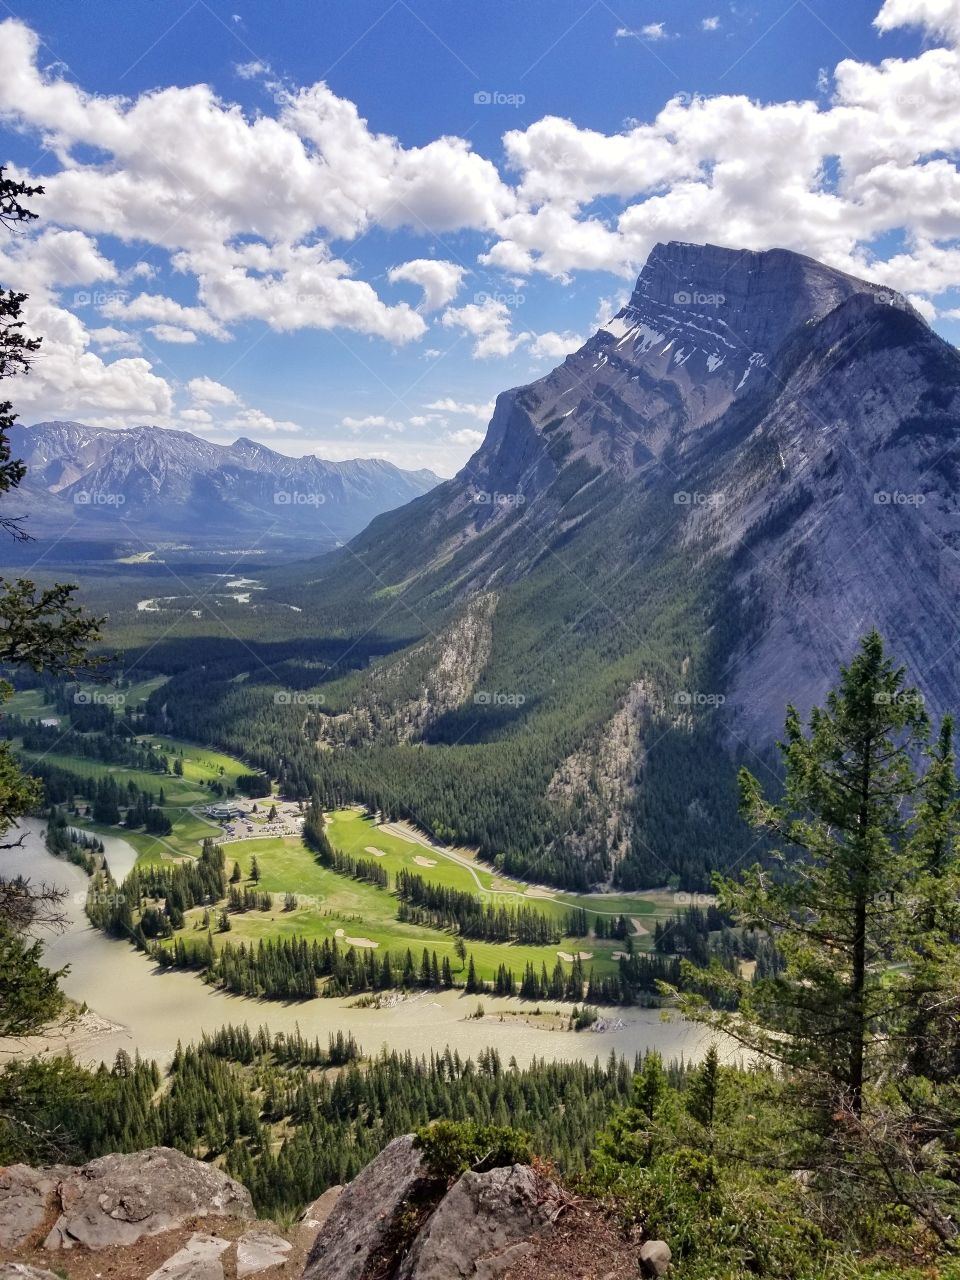 Overlooking Sulphur mountain in Banff Alberta. The golf course in the valley can be seen at the bottom as well as Bow river.